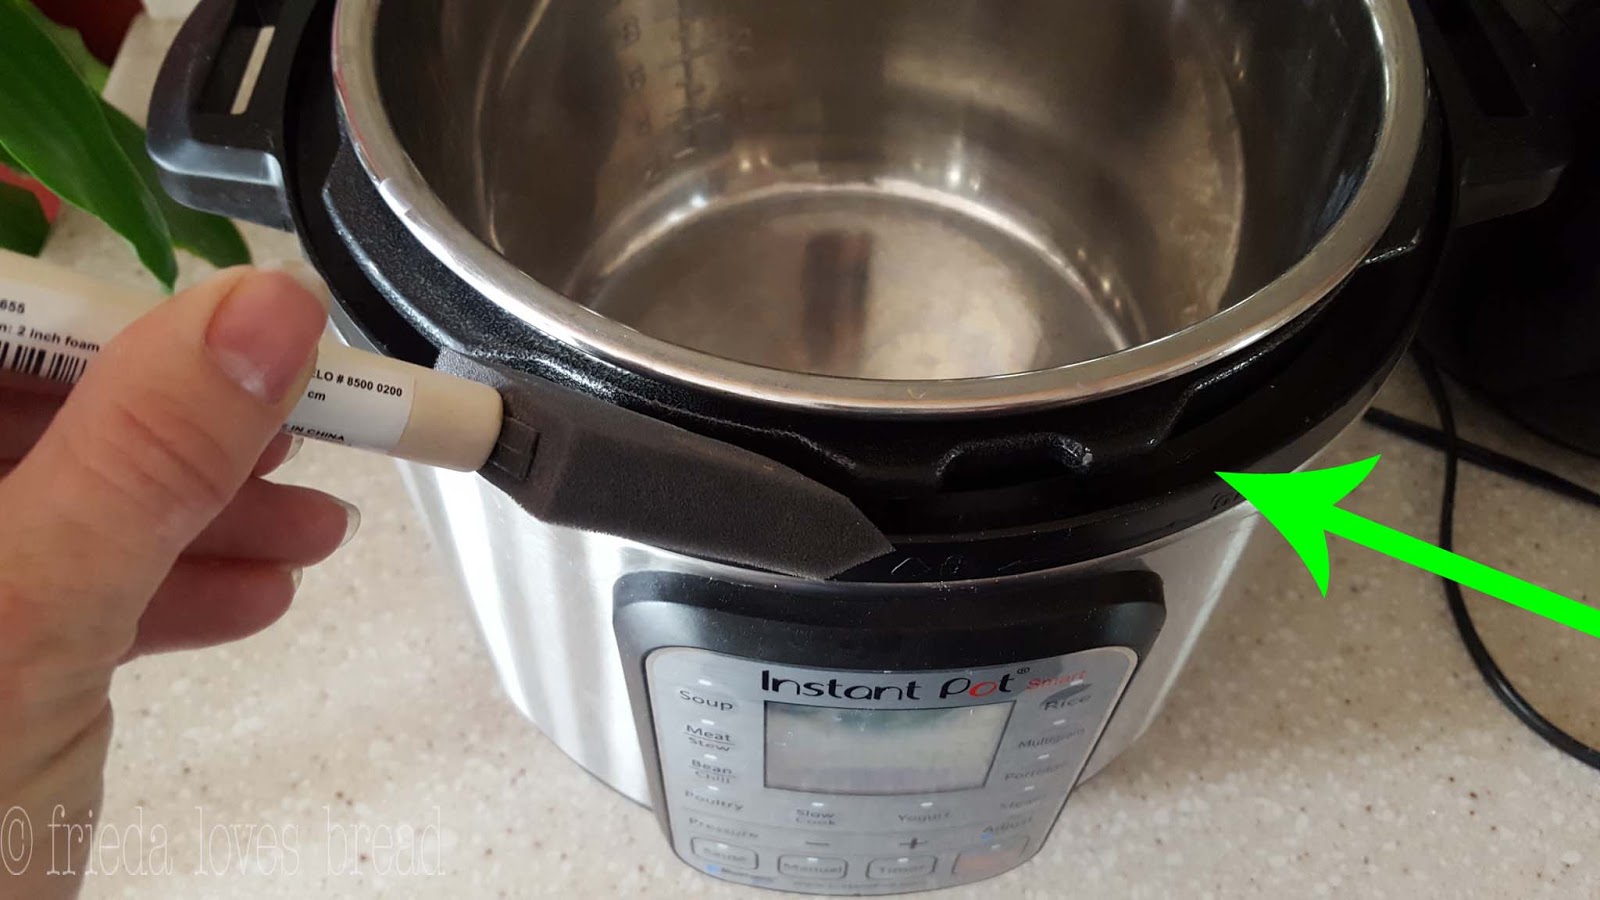 Instant Pot Max will let down fans of the famous pressure cooker